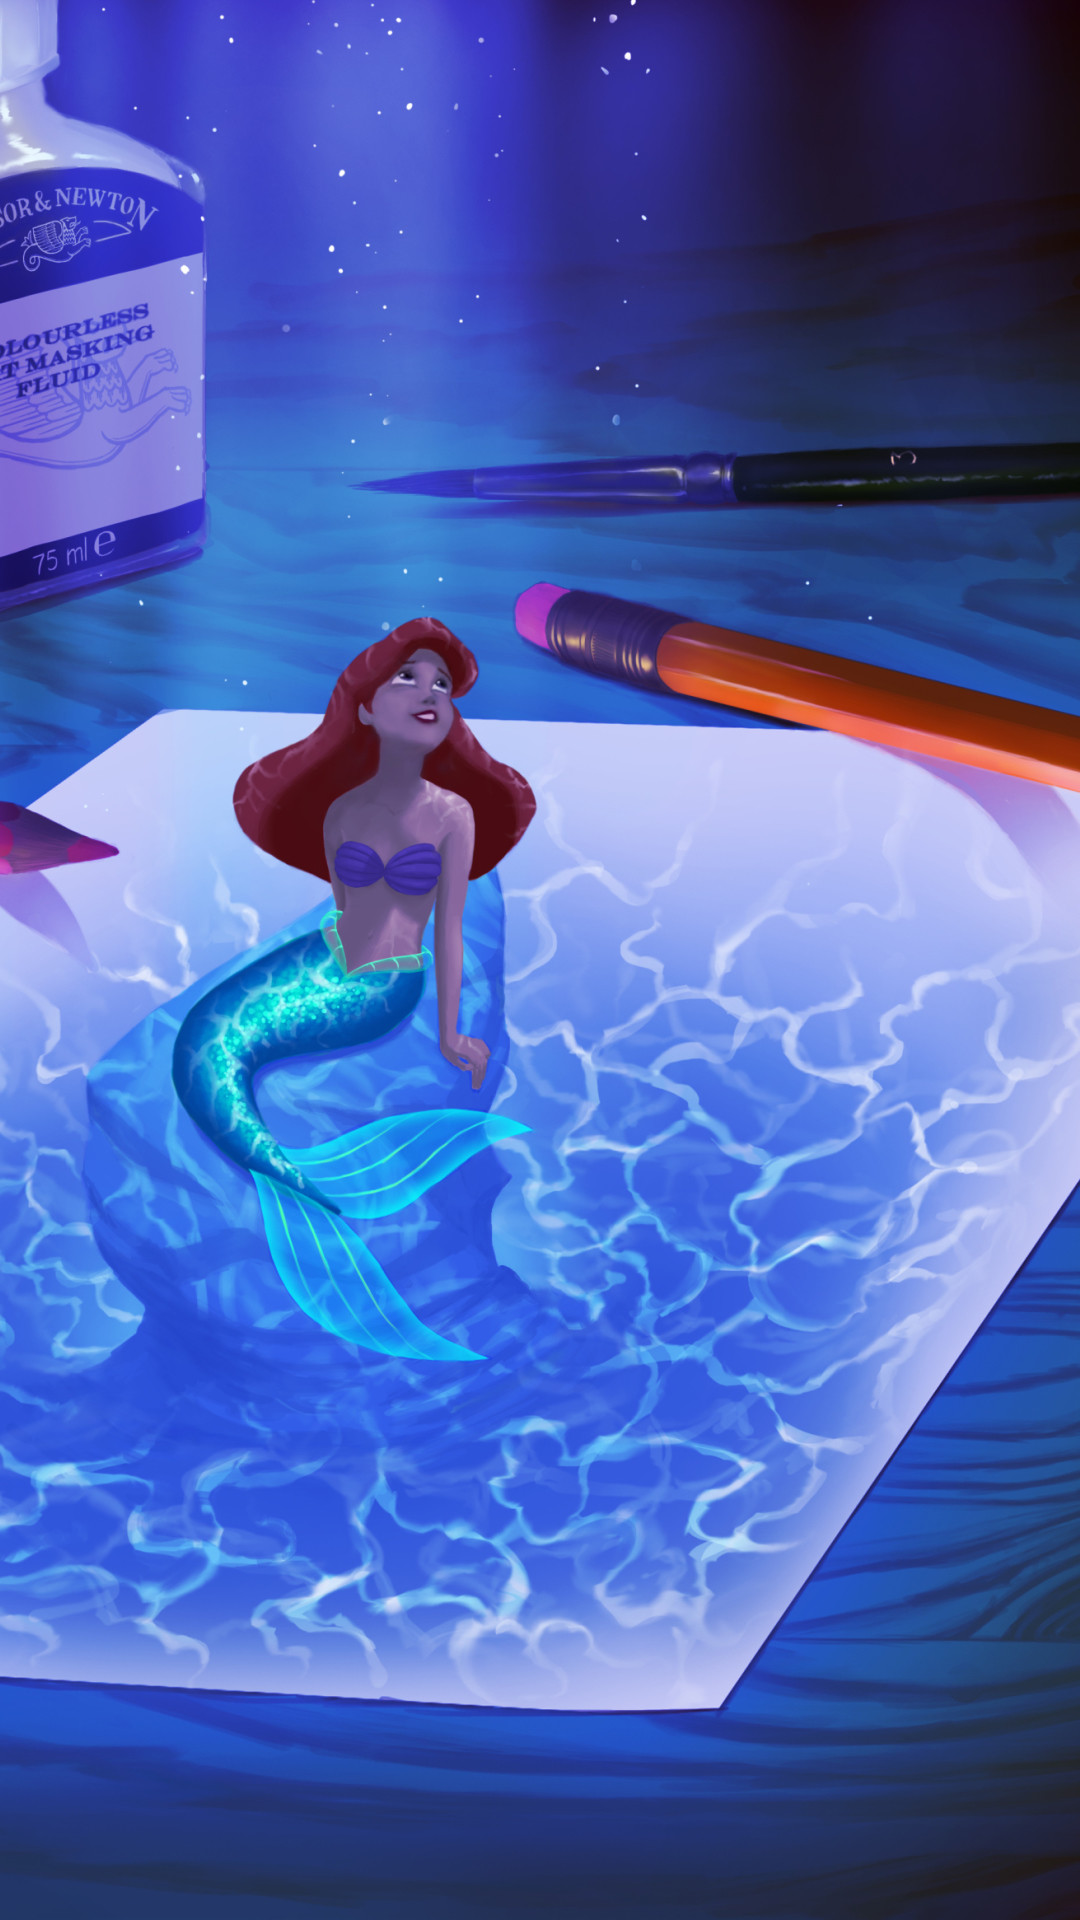 1080x1920 2560x1600 The little Mermaid New HD Wallpapers - All HD Wallpapers